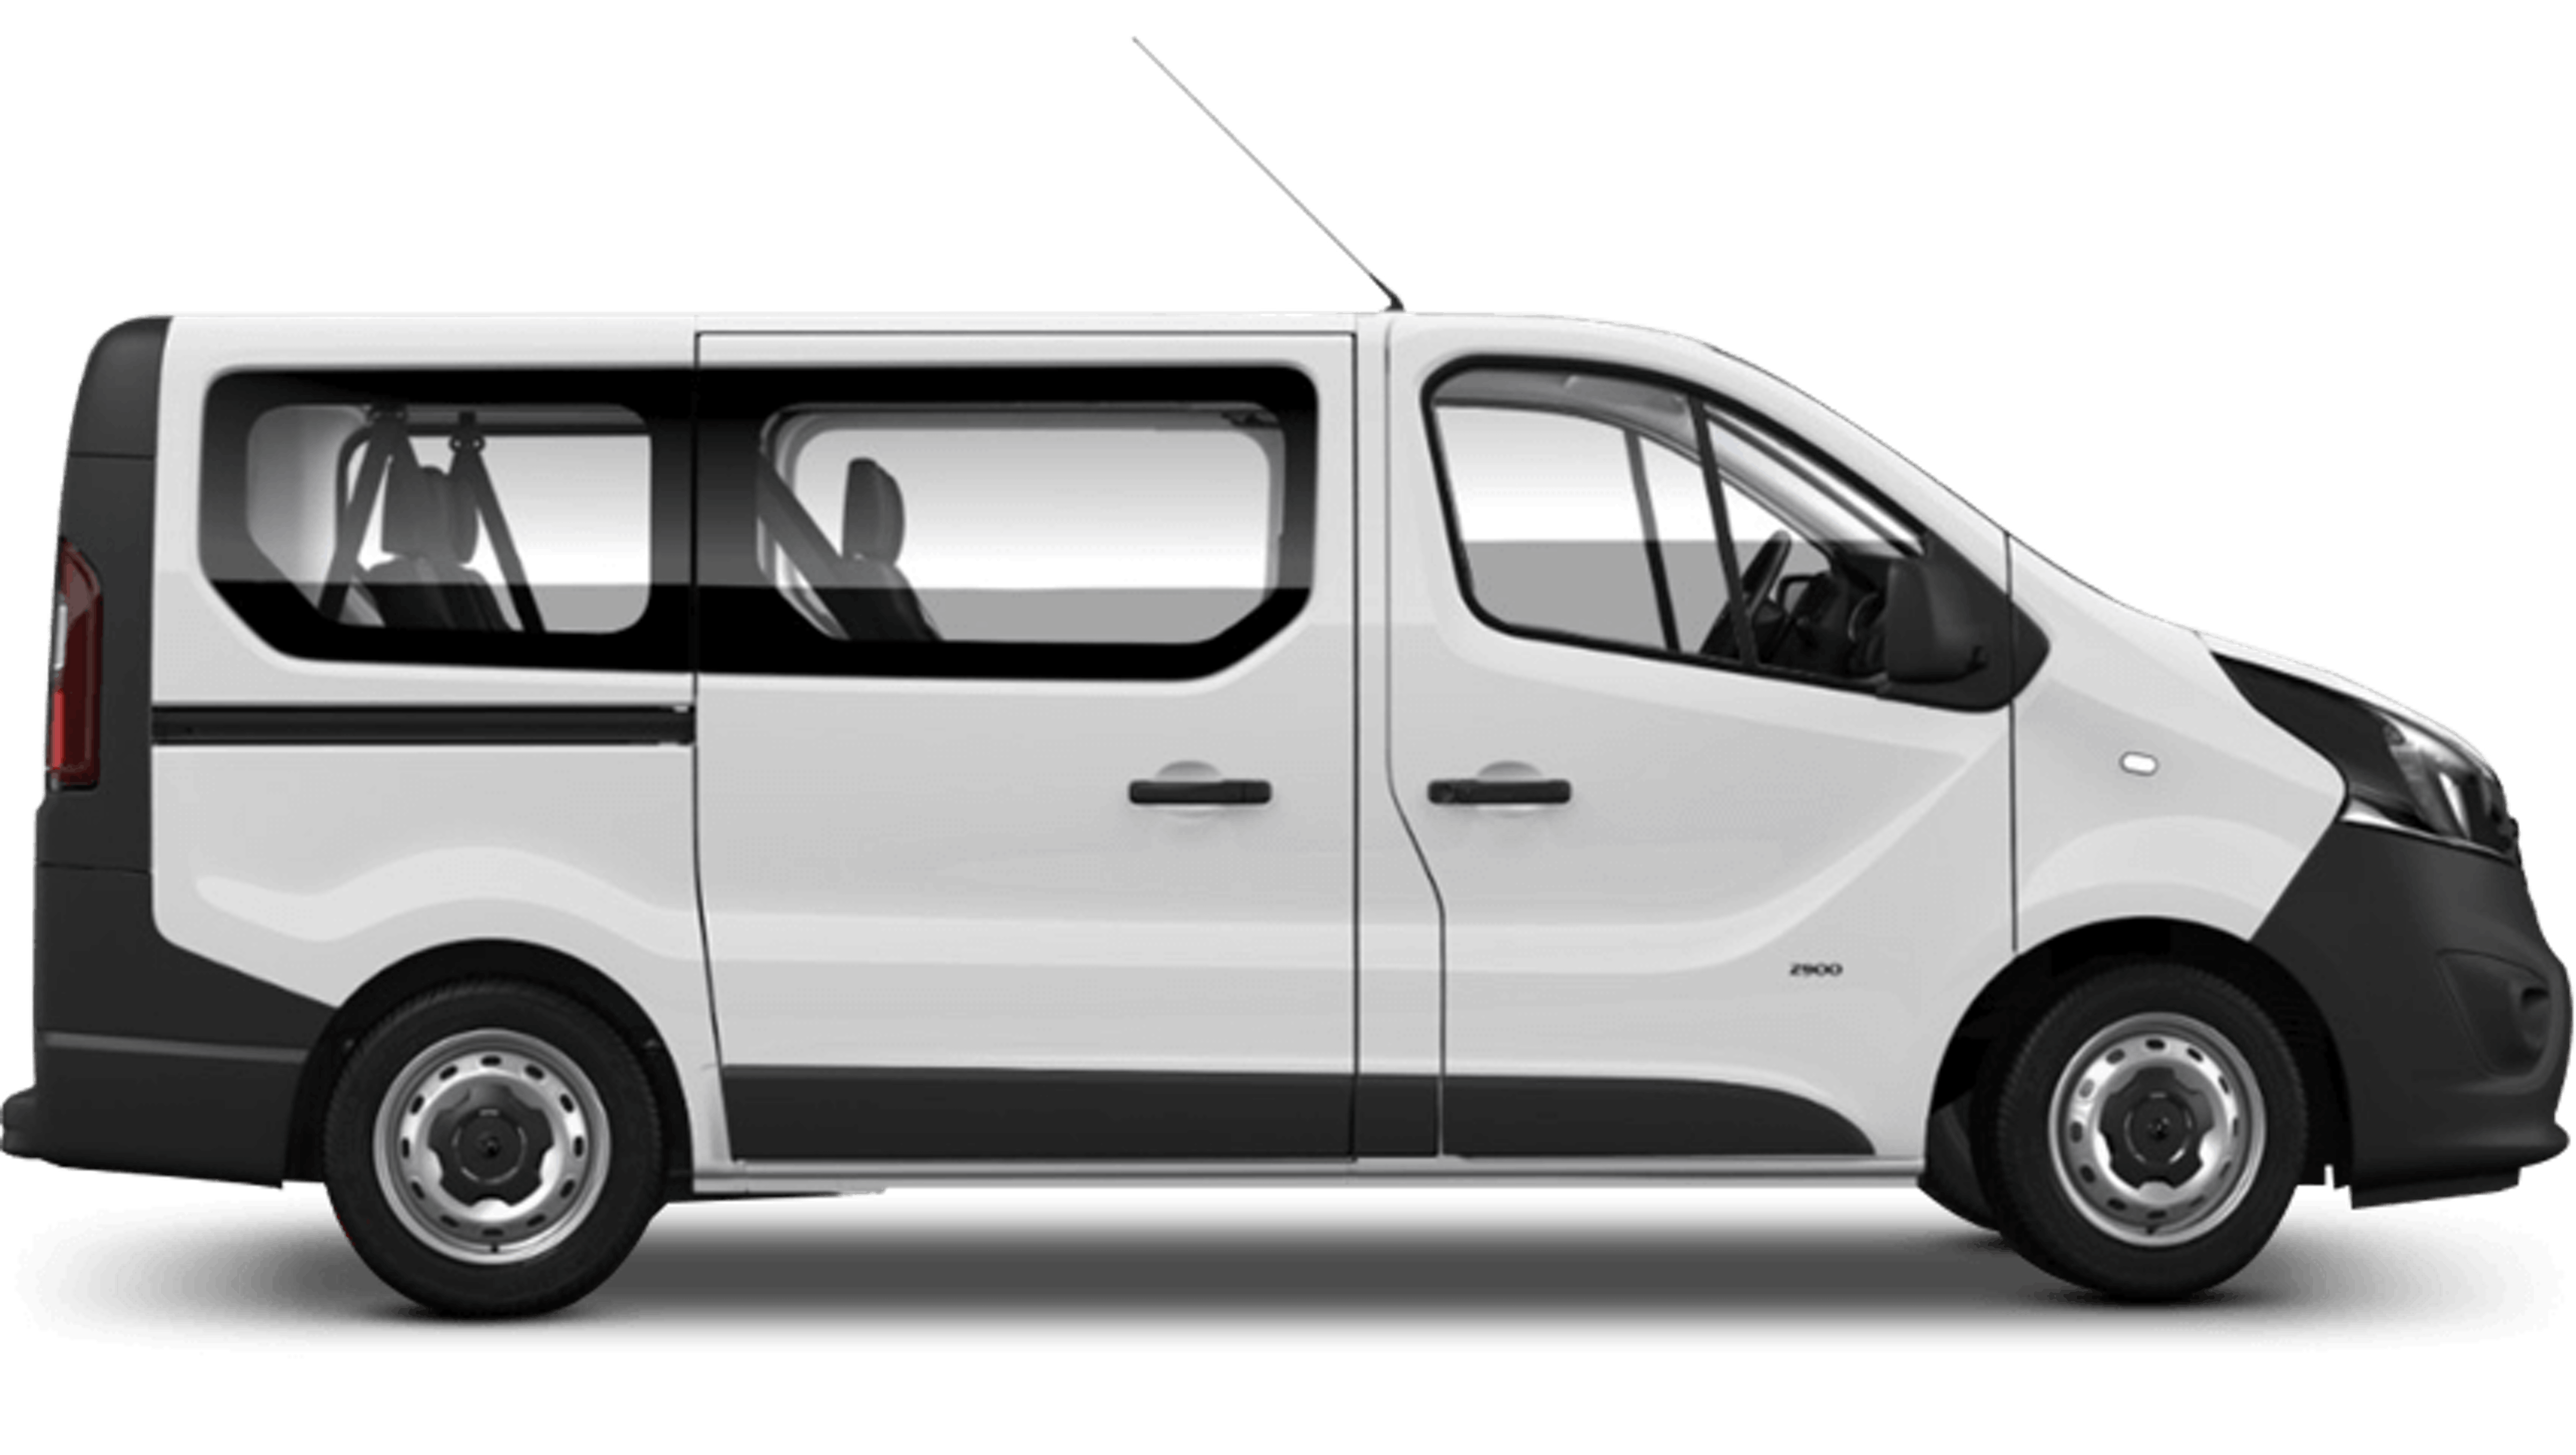 Renault Trafic Combi hd restyling